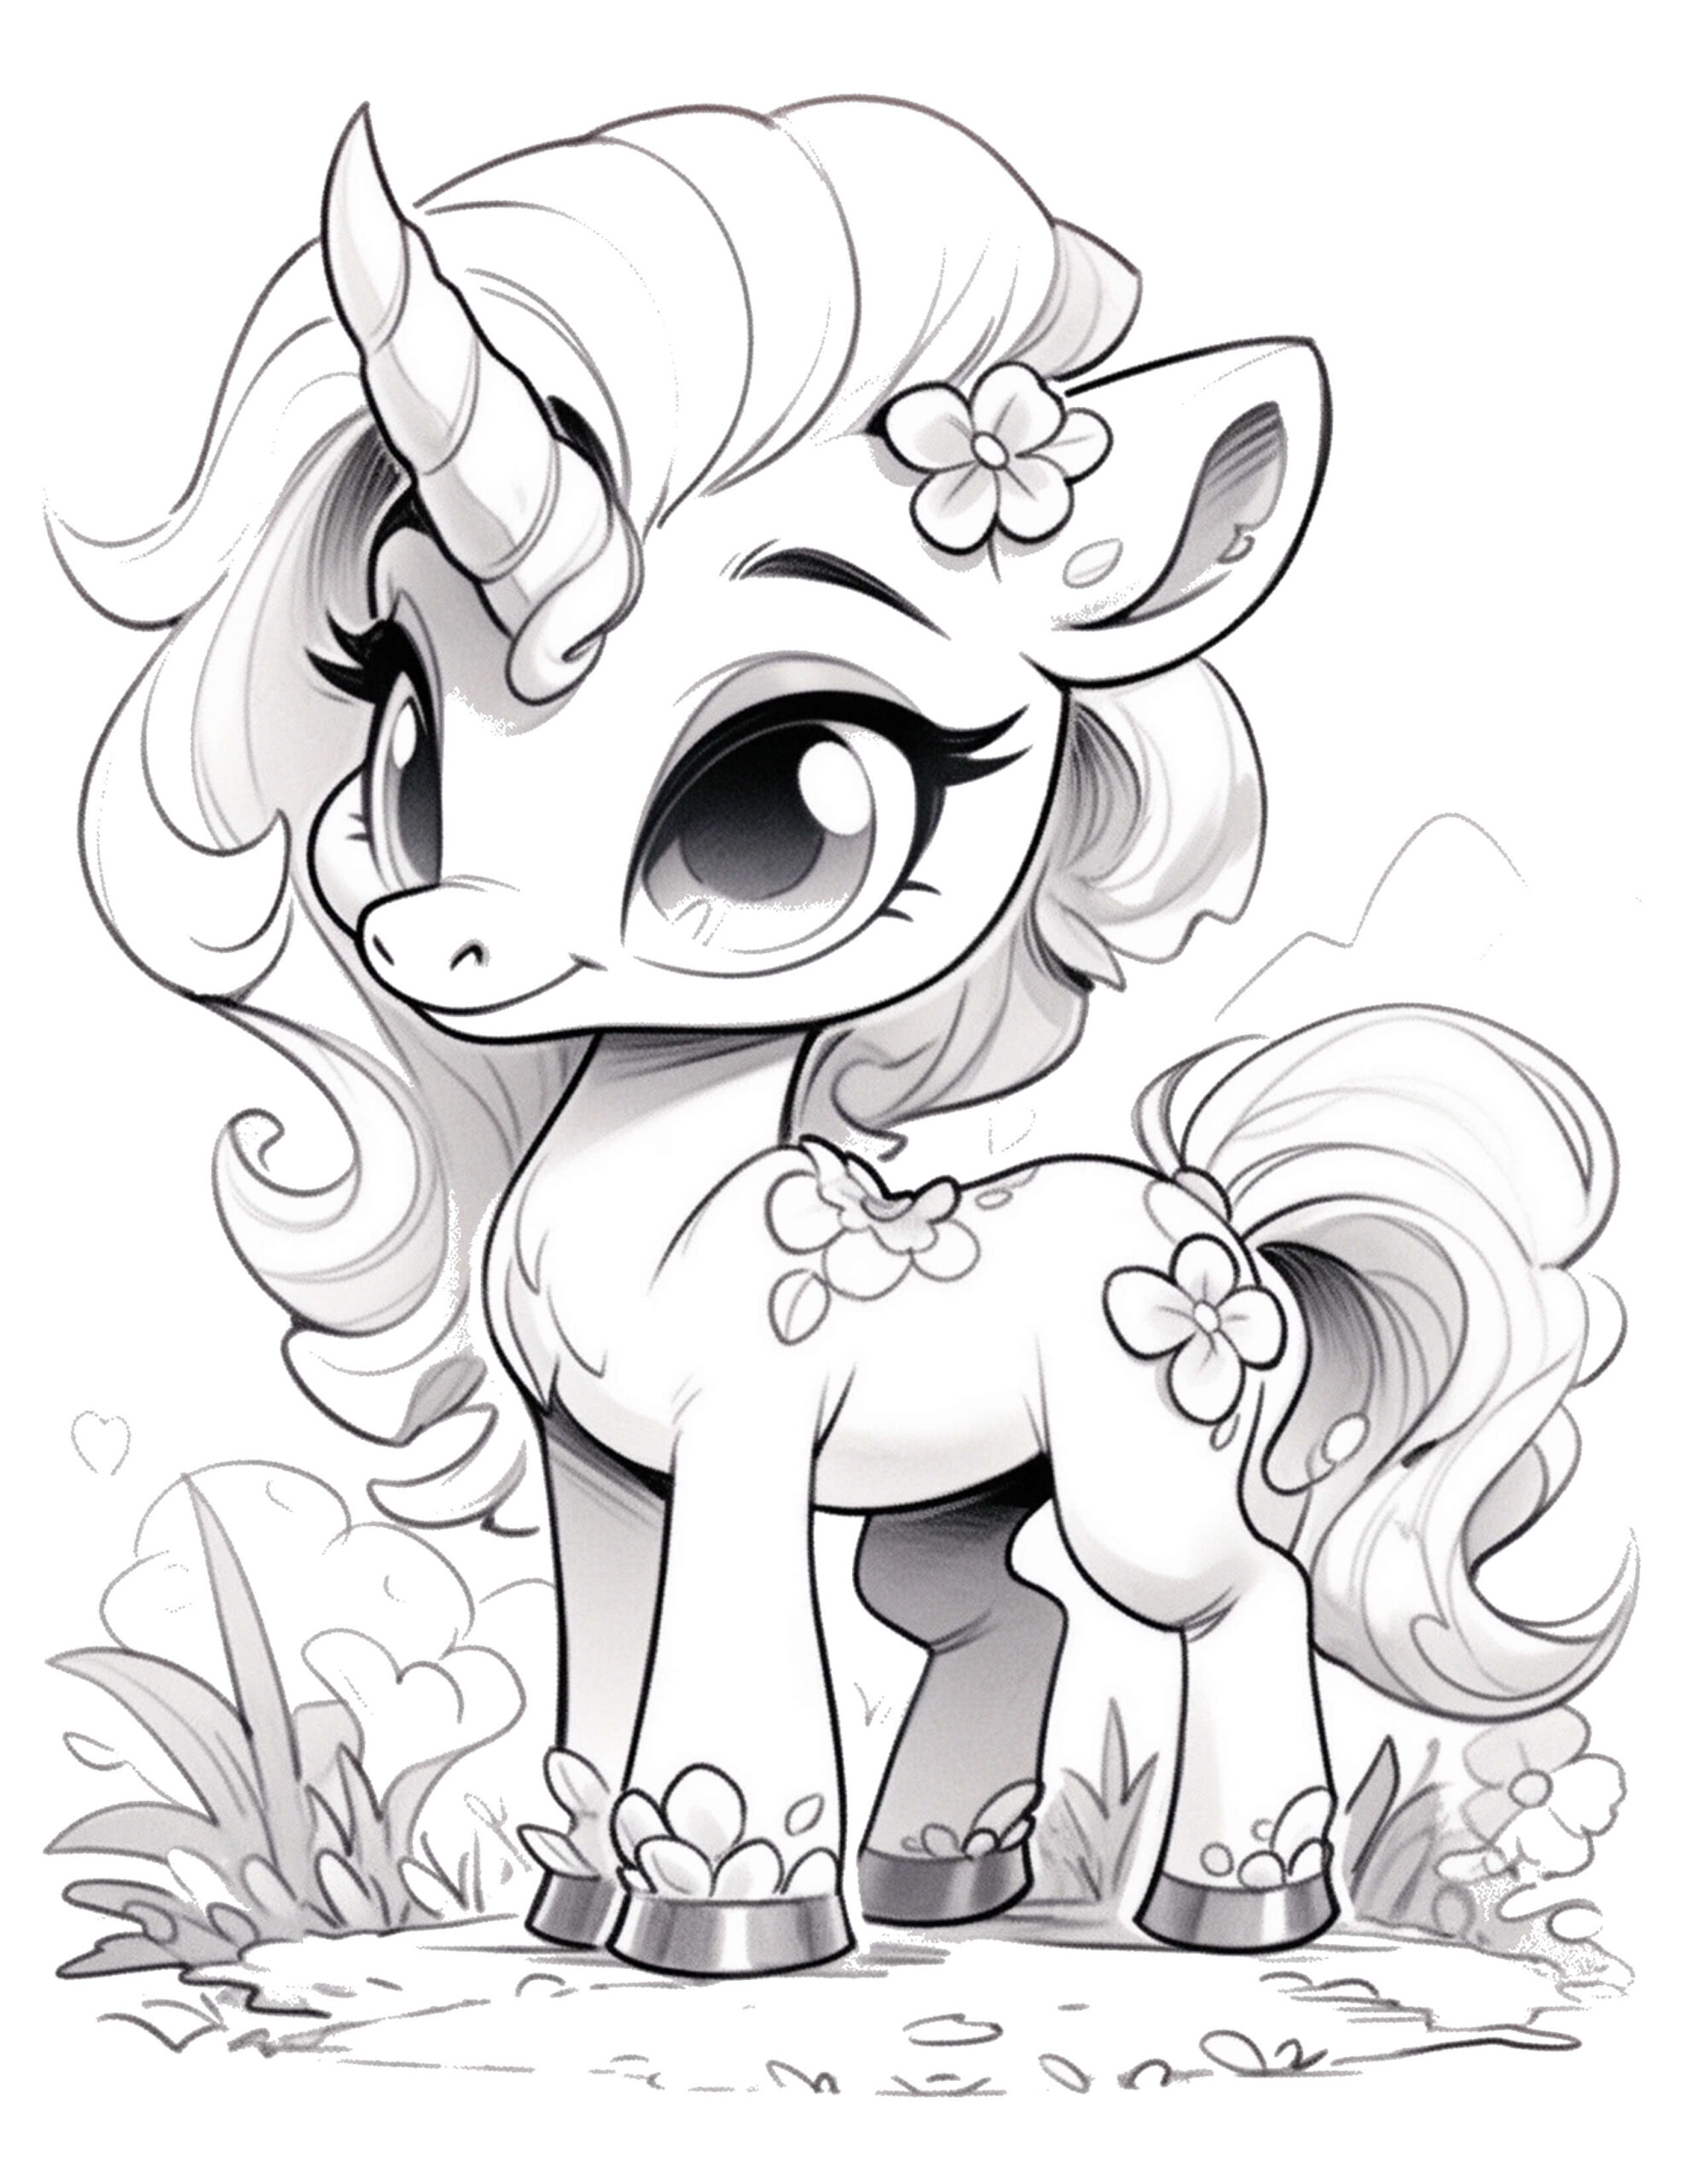 Unicorn Coloring Pages - The Poppy Jar